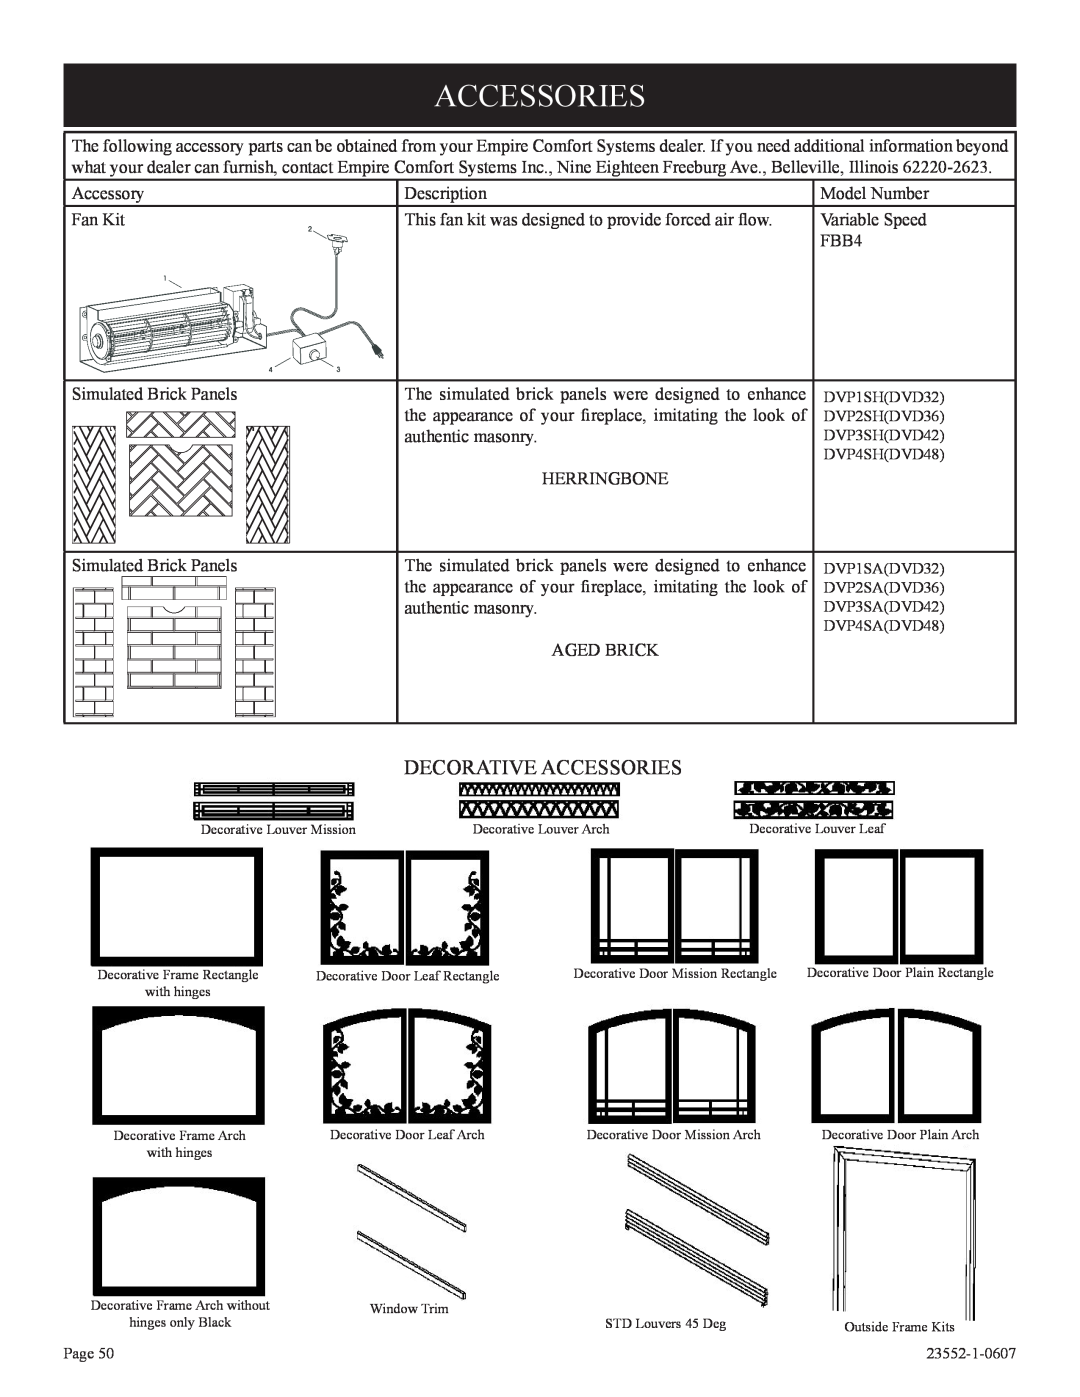 Empire Comfort Systems DVD48FP3, DVD42FP5, DVD48FP5, DVD36FP3, DVD42FP3 installation instructions Decorative Accessories 